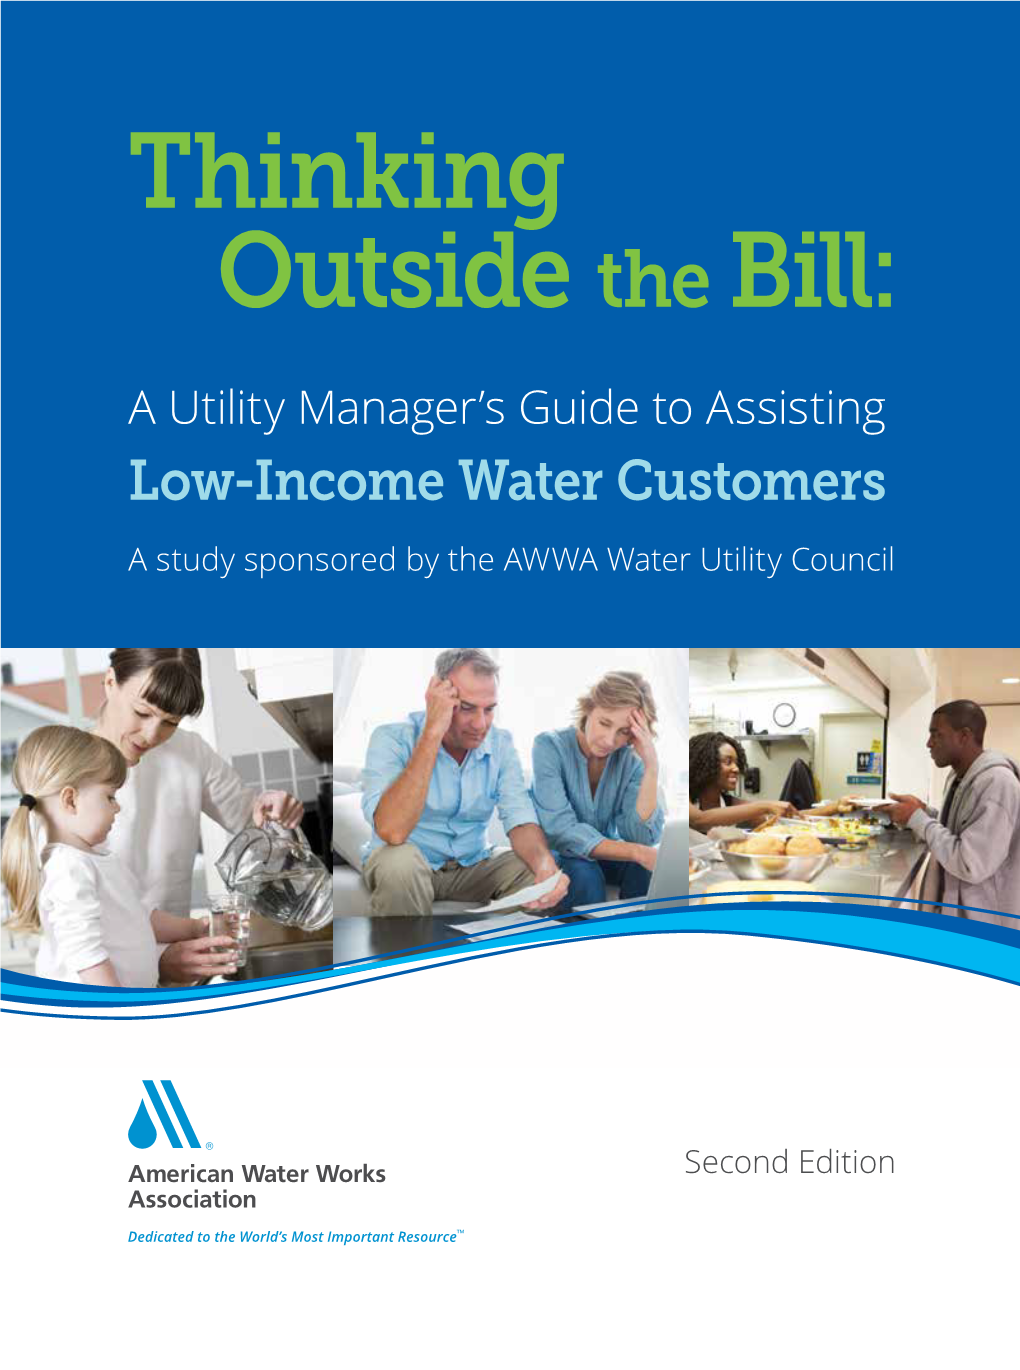 Thinking Outside the Bill: a Utility Manager's Guide to Assisting Low